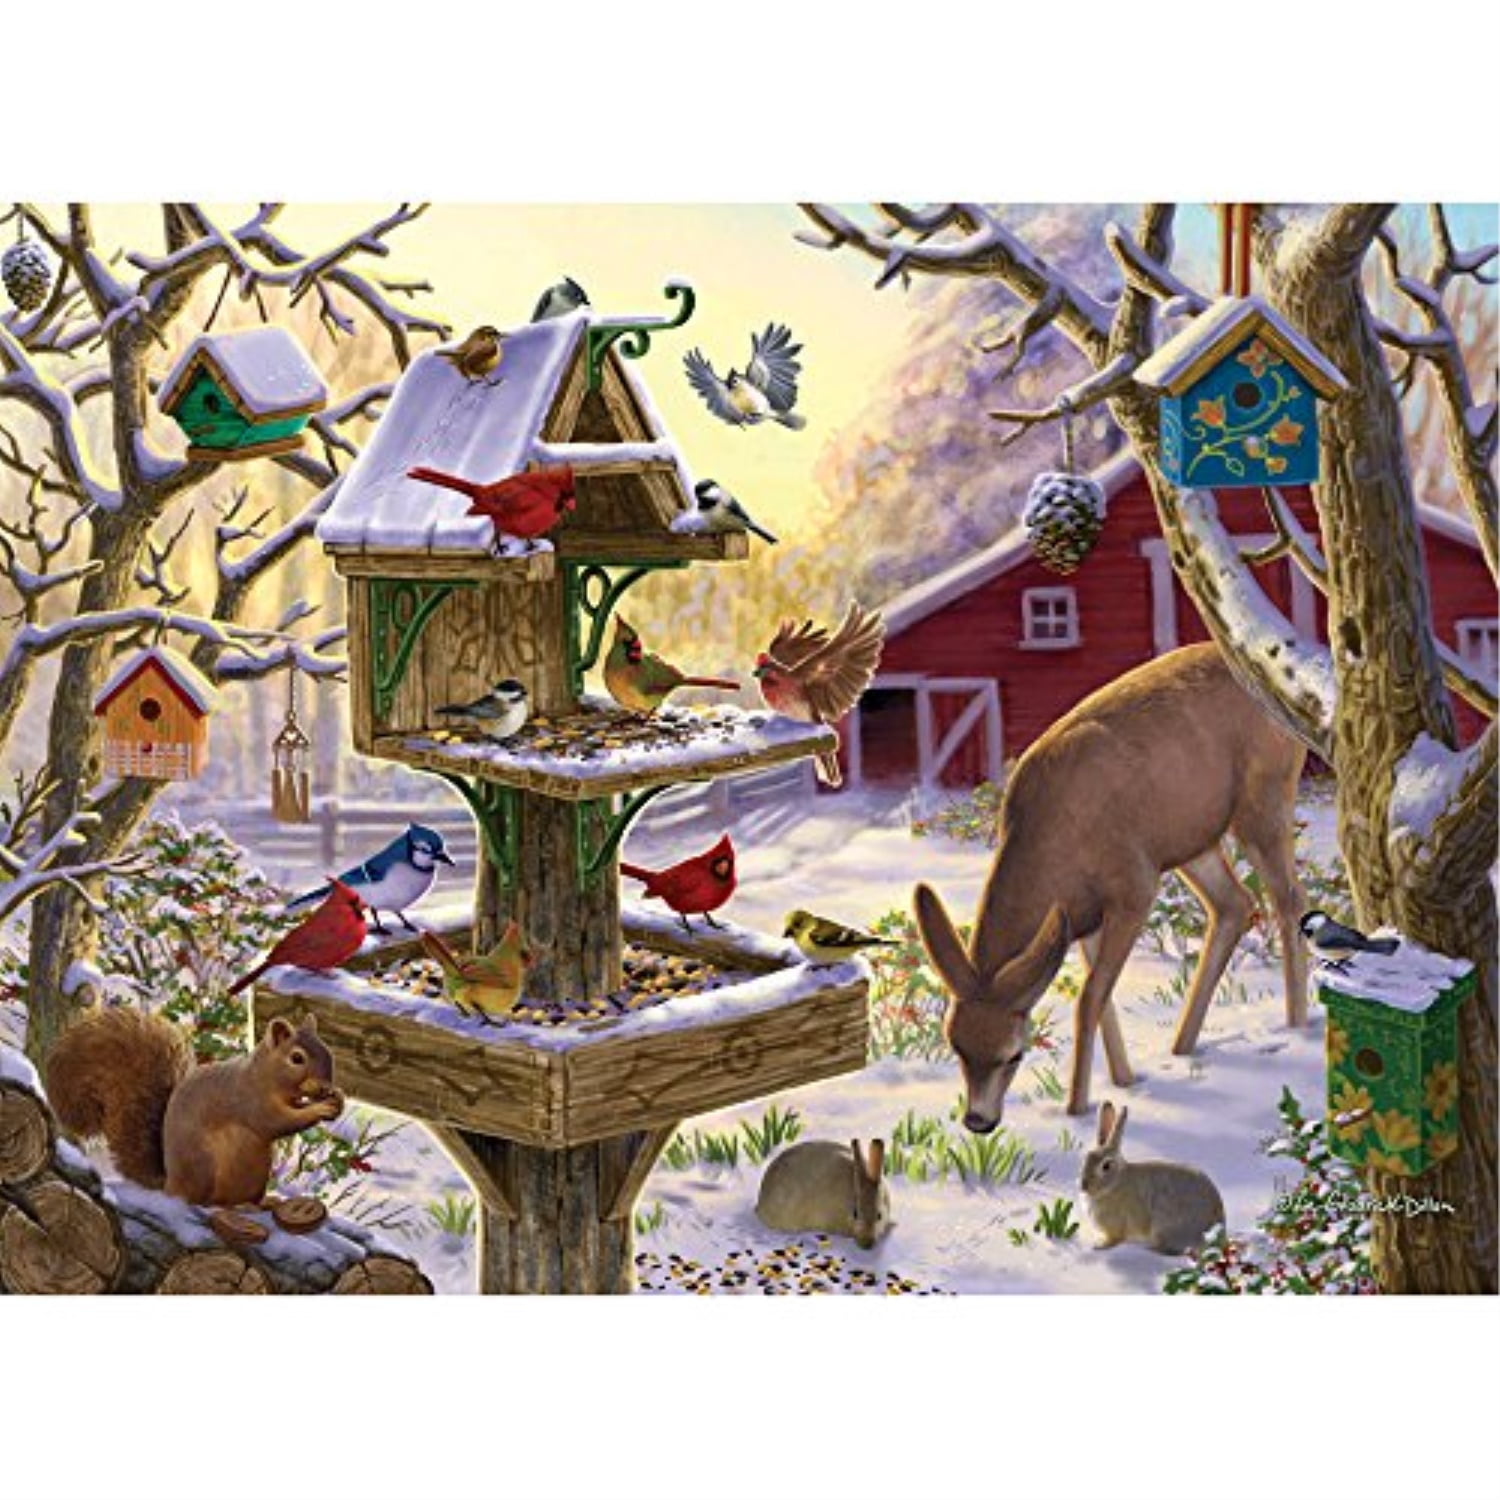 bits and pieces - 500 piece jigsaw puzzle for adults - sunrise feasting